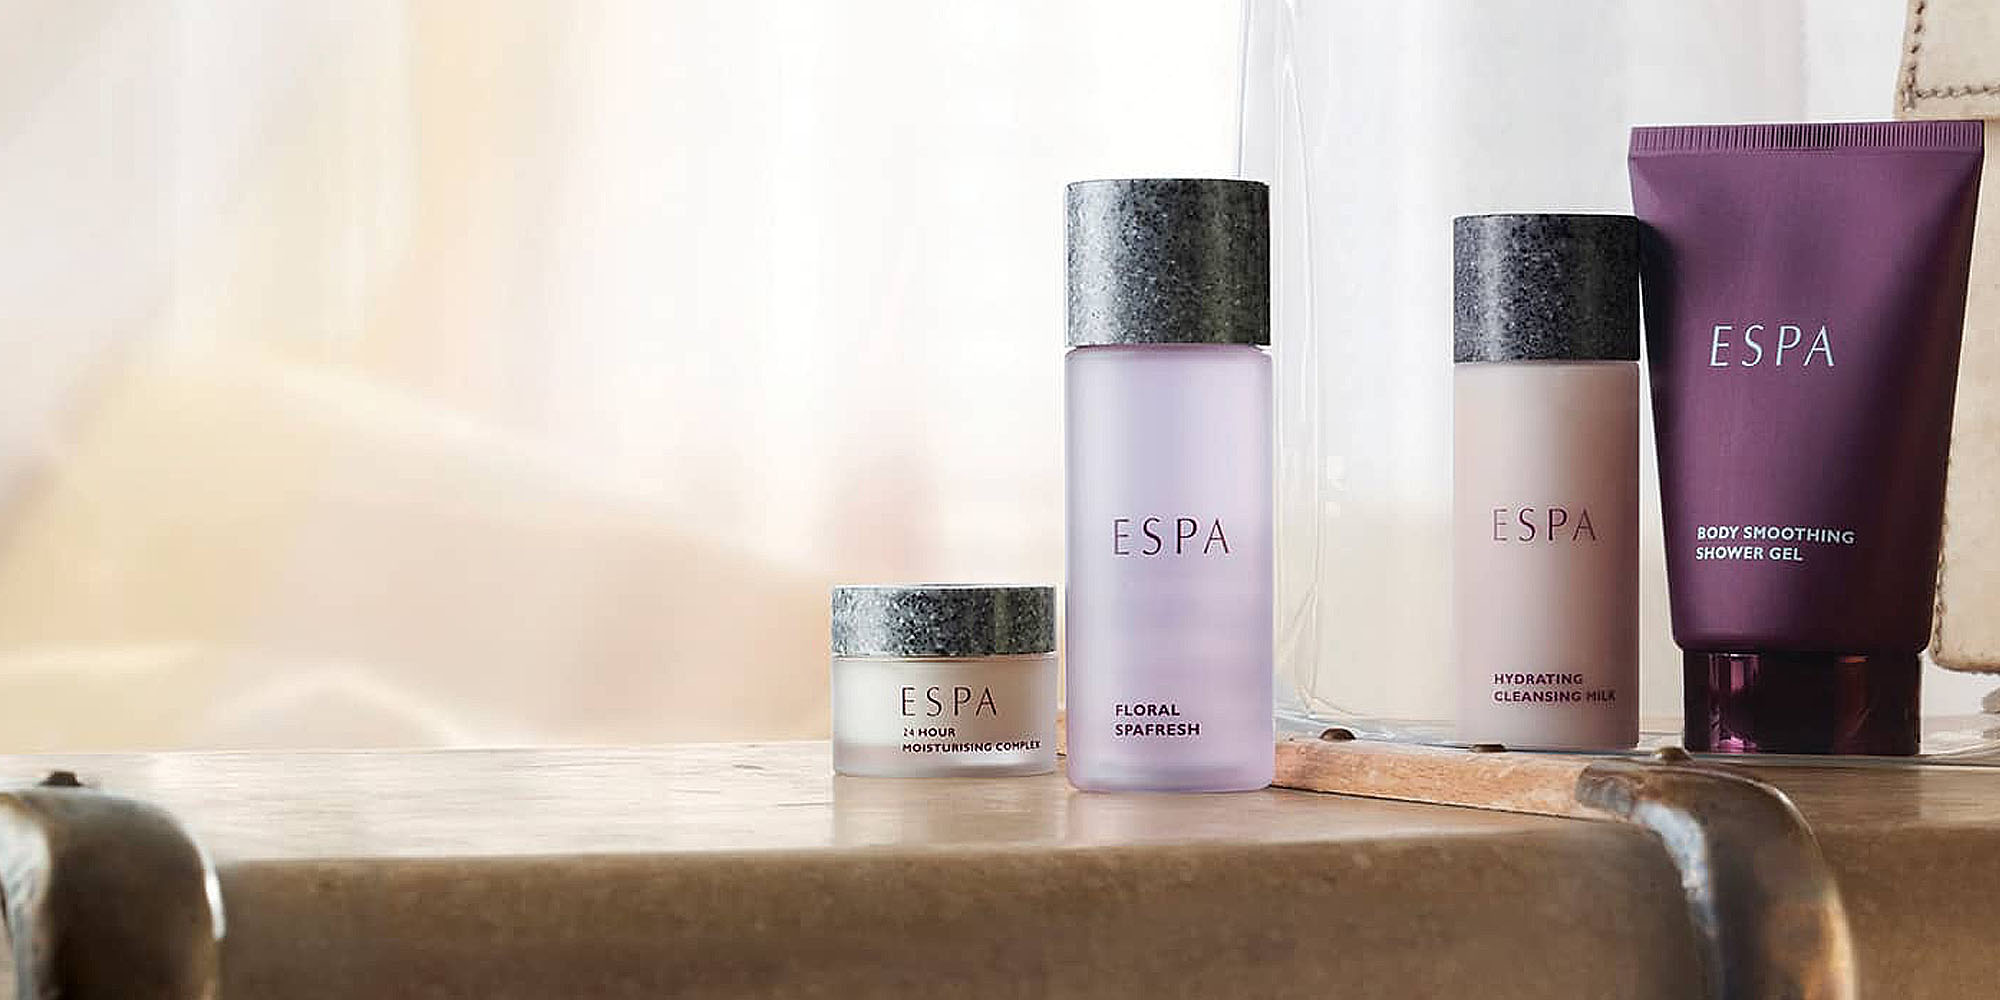 Finding Purity with ESPA